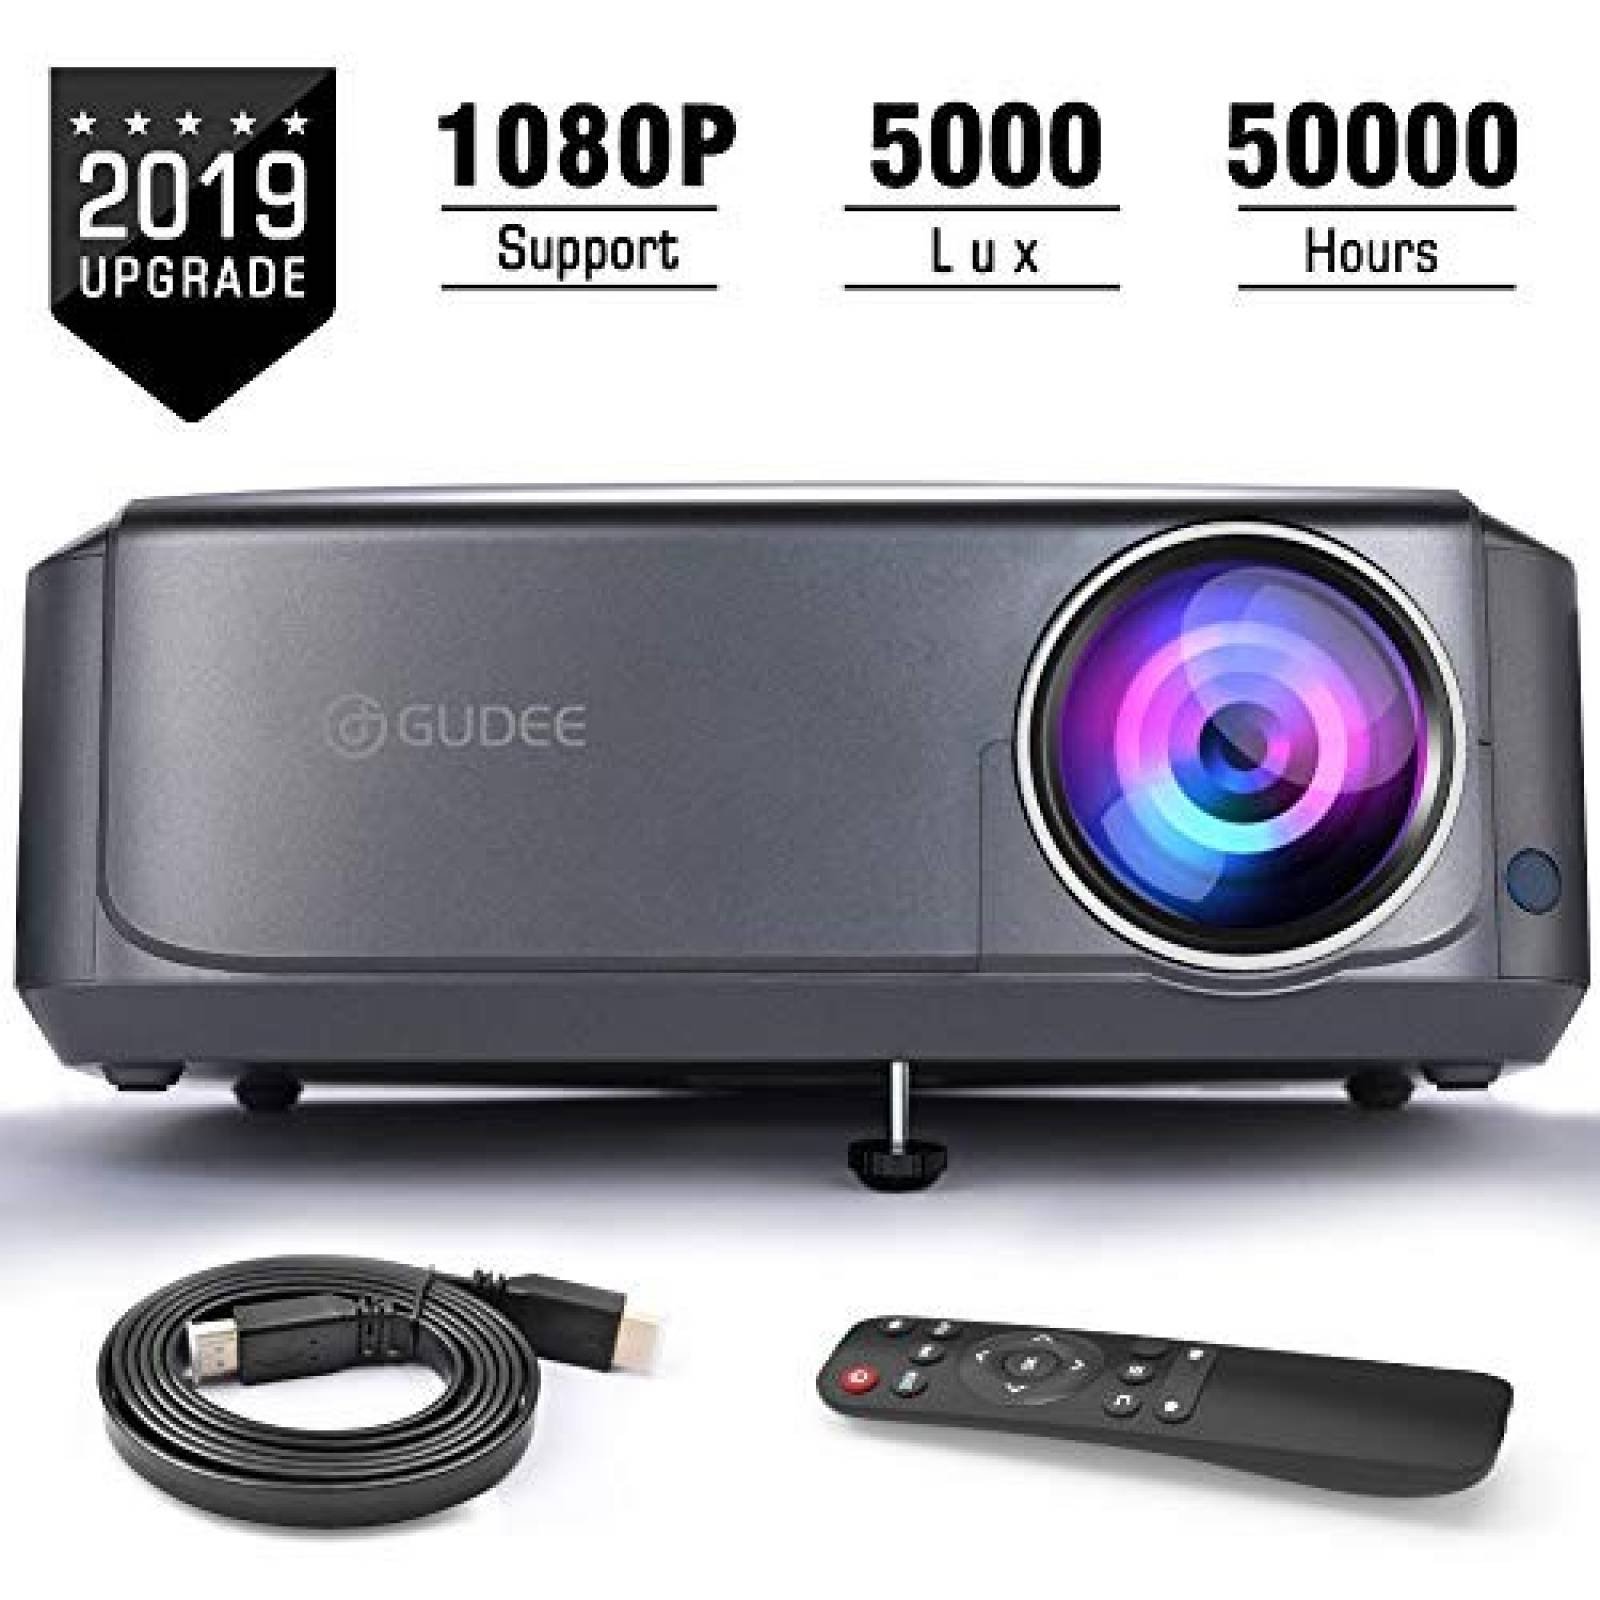 Videoproyector GUDEE Full HD1080P 5000Lux p/ PS4, HDMI USB